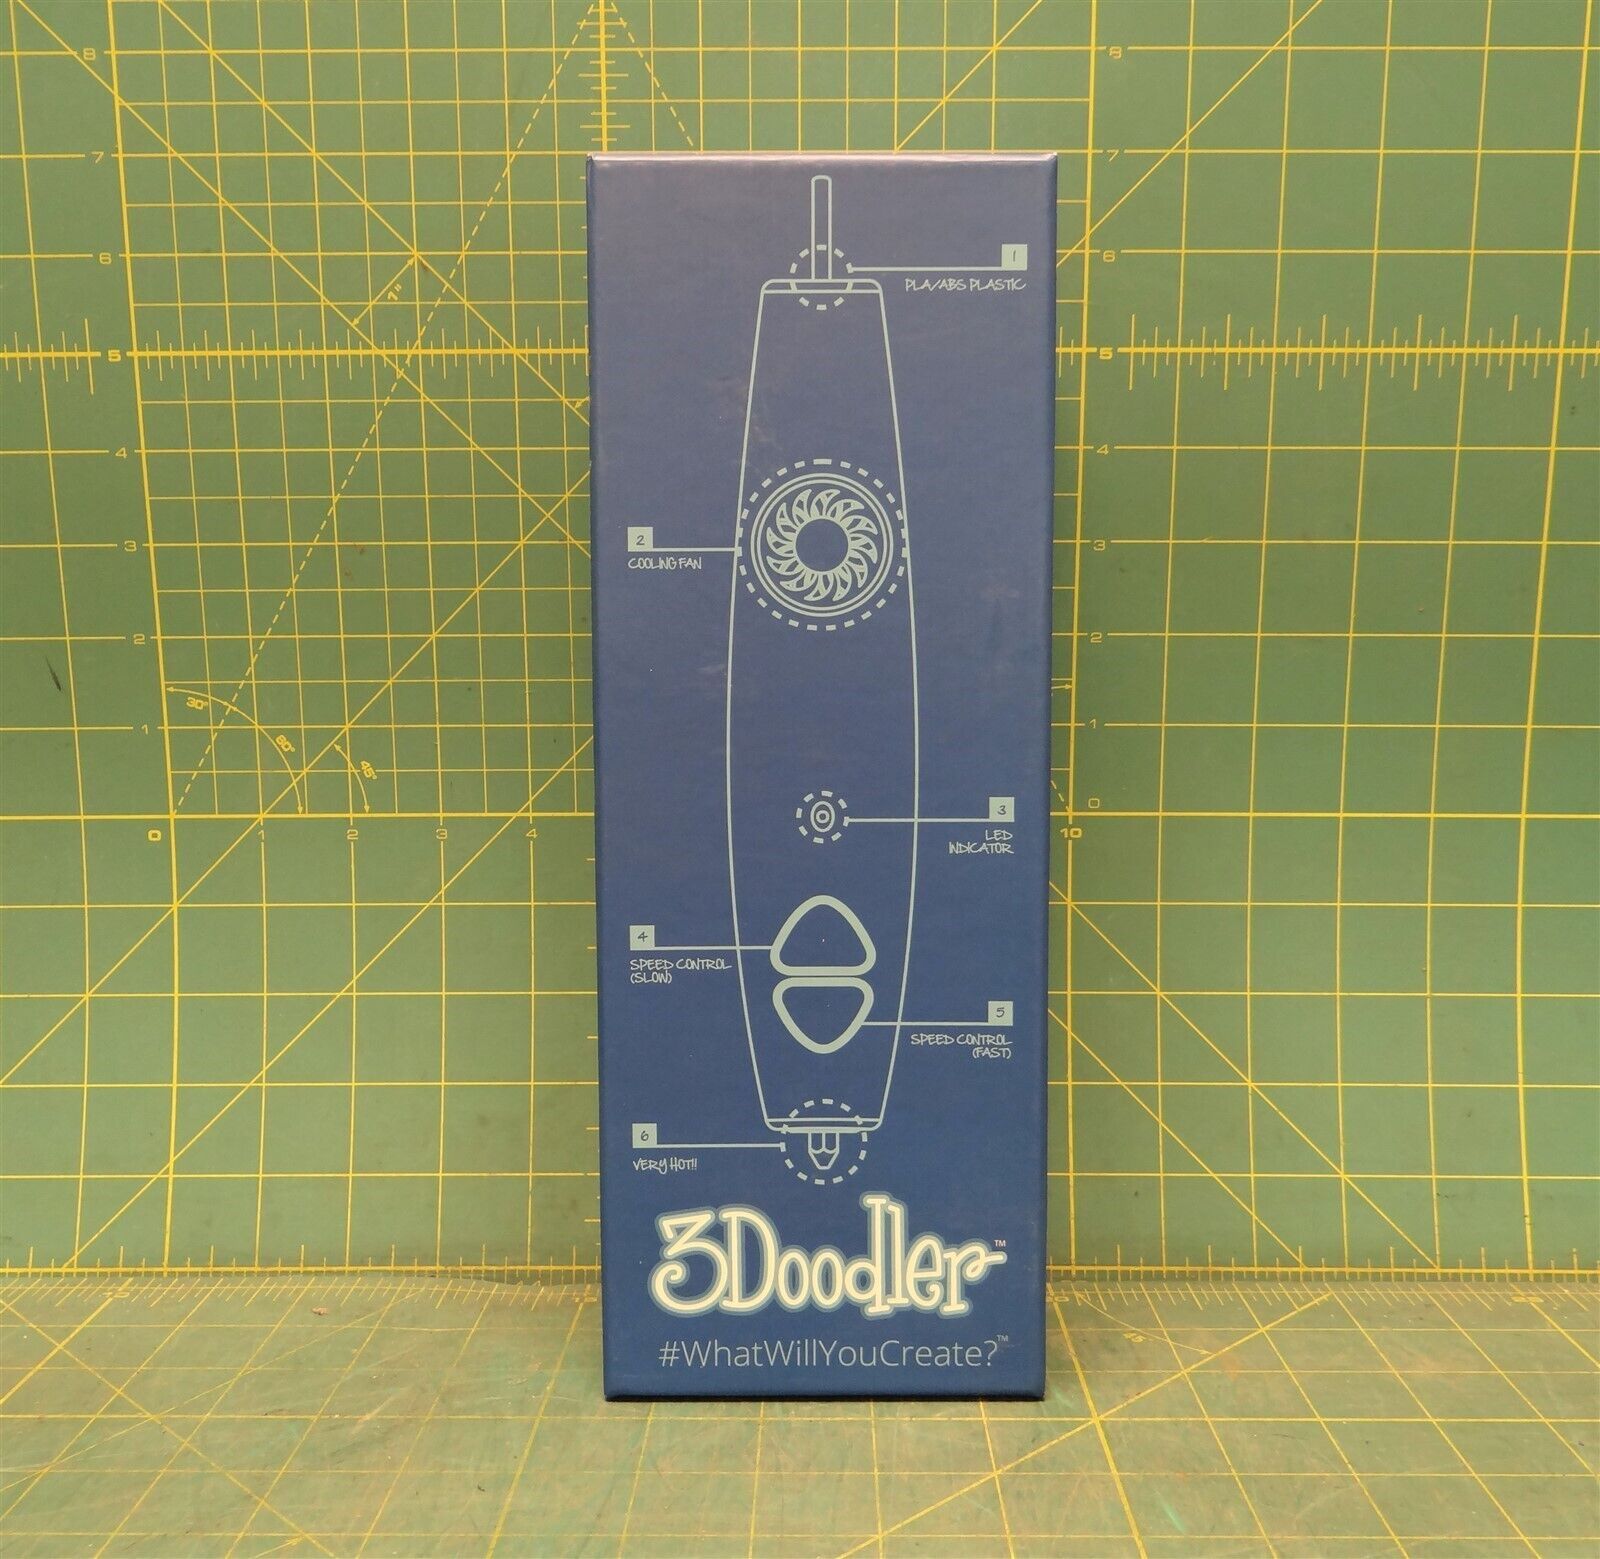 3Doodler First Edition 3D Drawing Pen Project Kit with 25 ABS/25 PLA Filaments